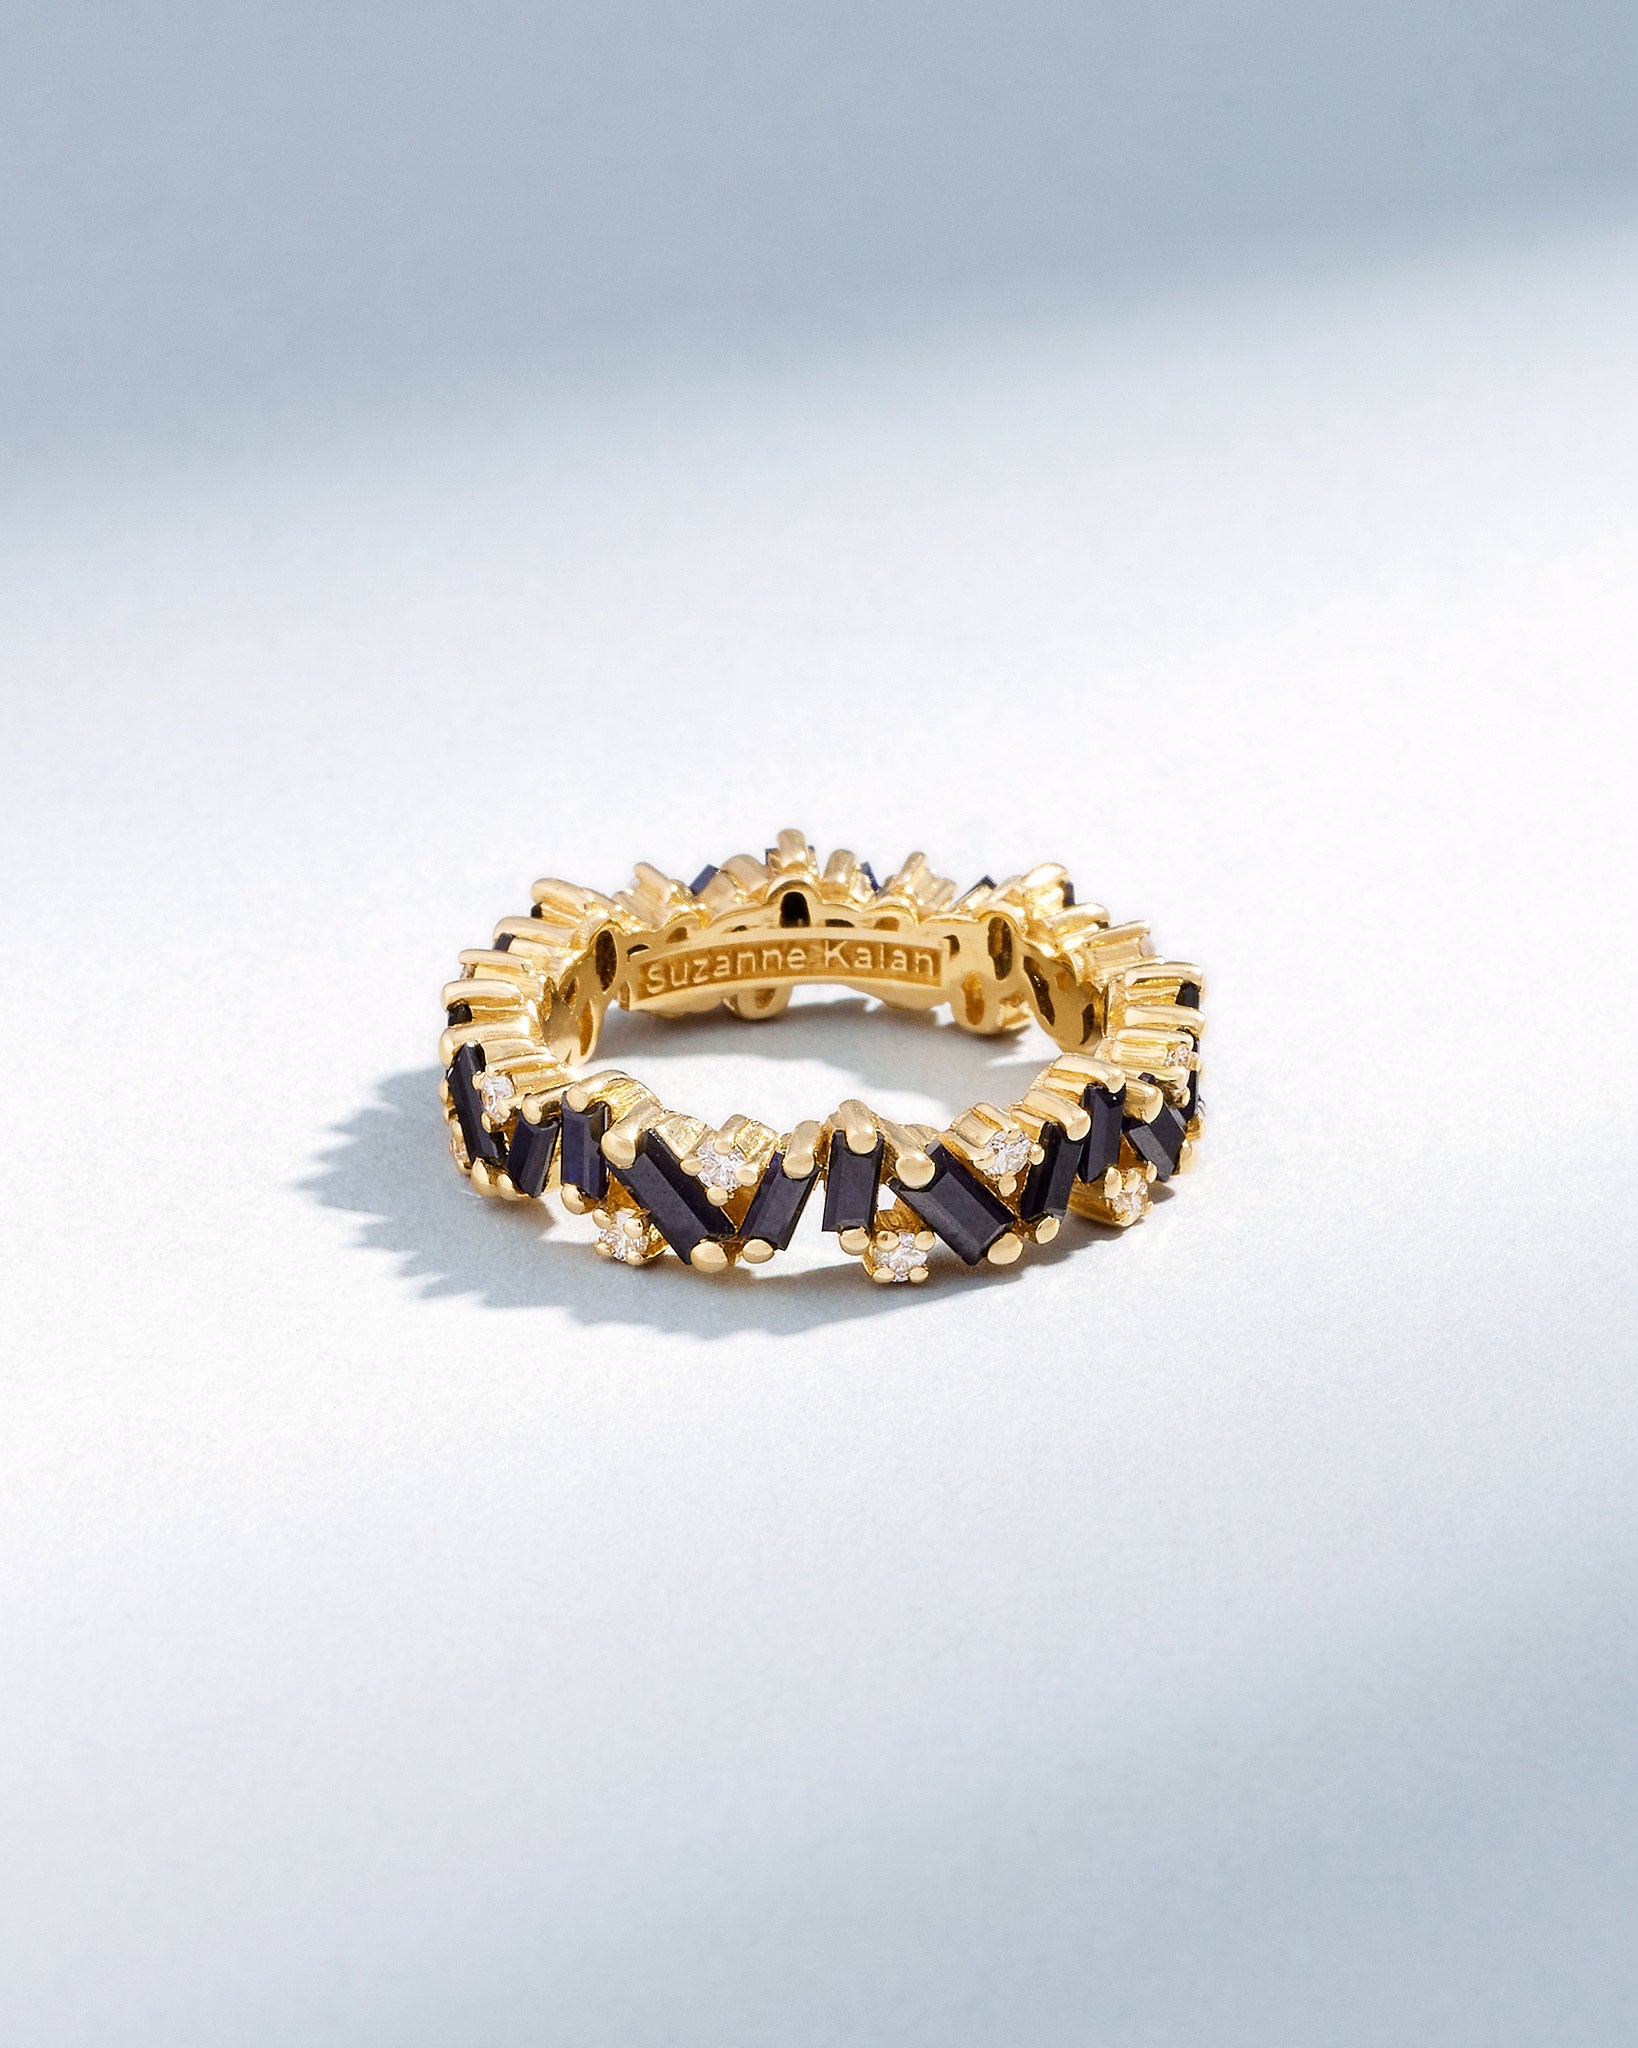 Suzanne Kalan Frenzy Black Sapphire Eternity Band in 18k yellow gold